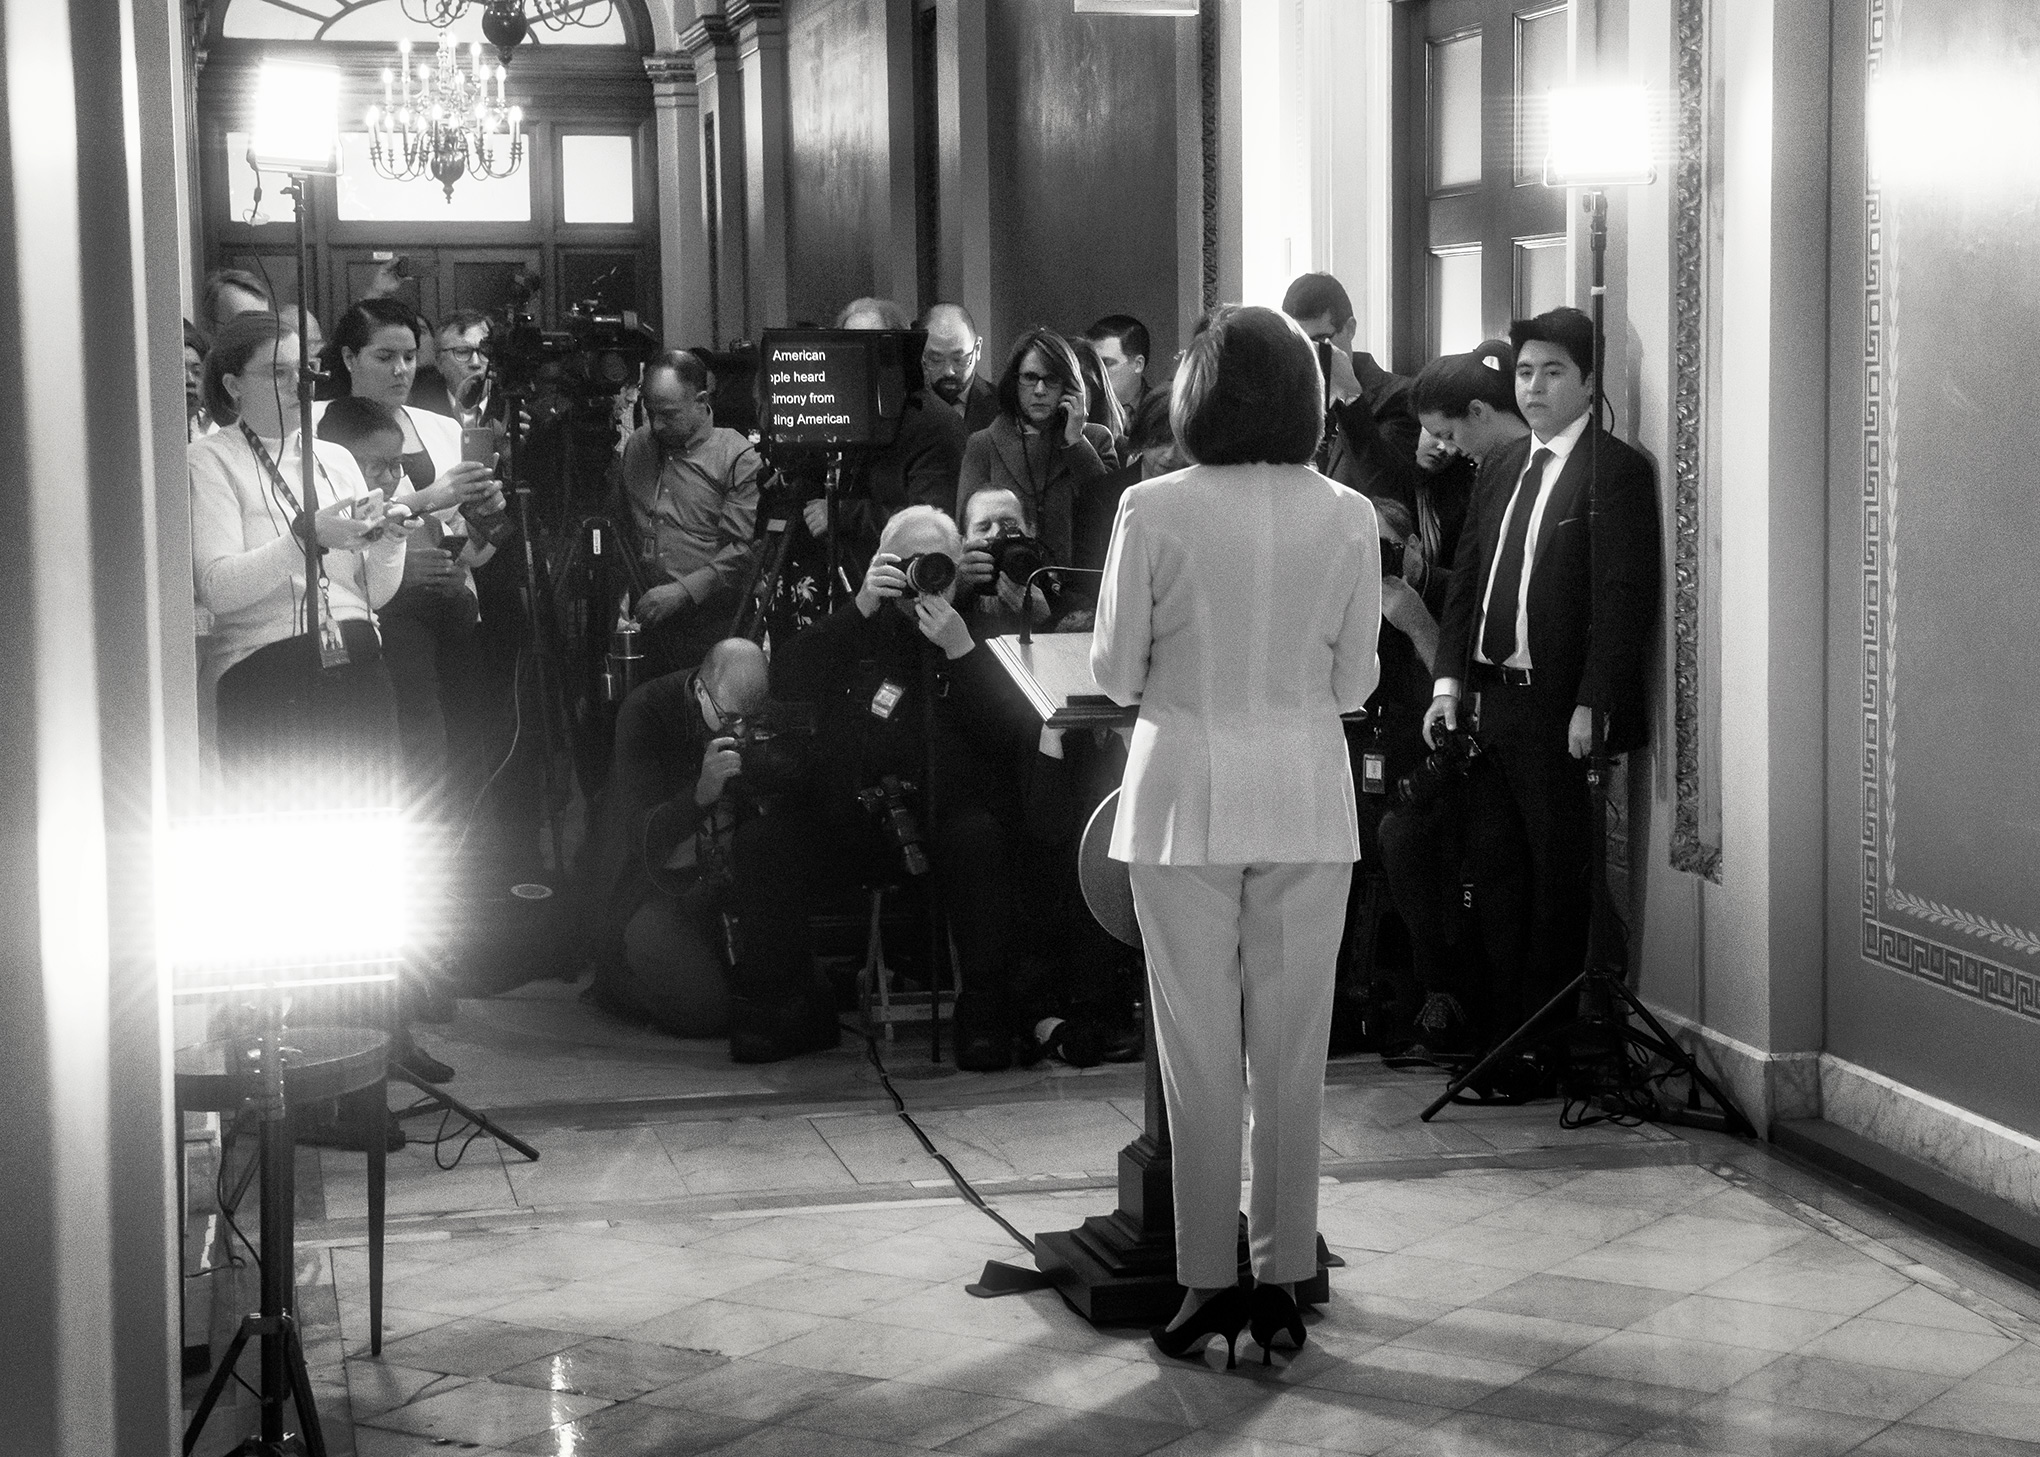 In a televised address given at the Capitol on the morning of December 5, Pelosi announces that the House of Representatives will begin drafting articles of impeachment. (Philip Montgomery for TIME)